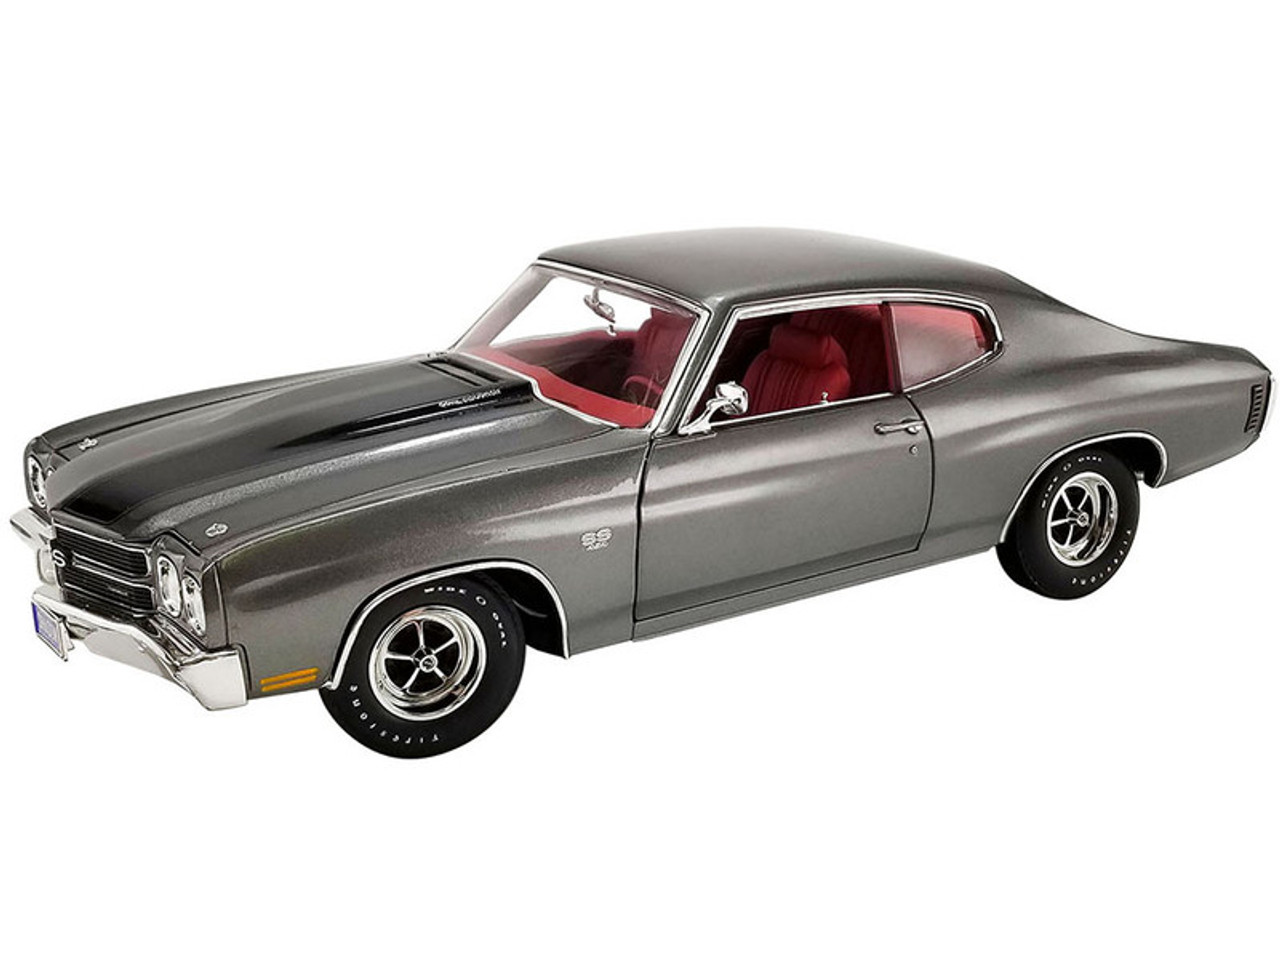 1970 Chevrolet Chevelle LS6 - Shadow Grey - 1:18 Diecast Model Car by ACME